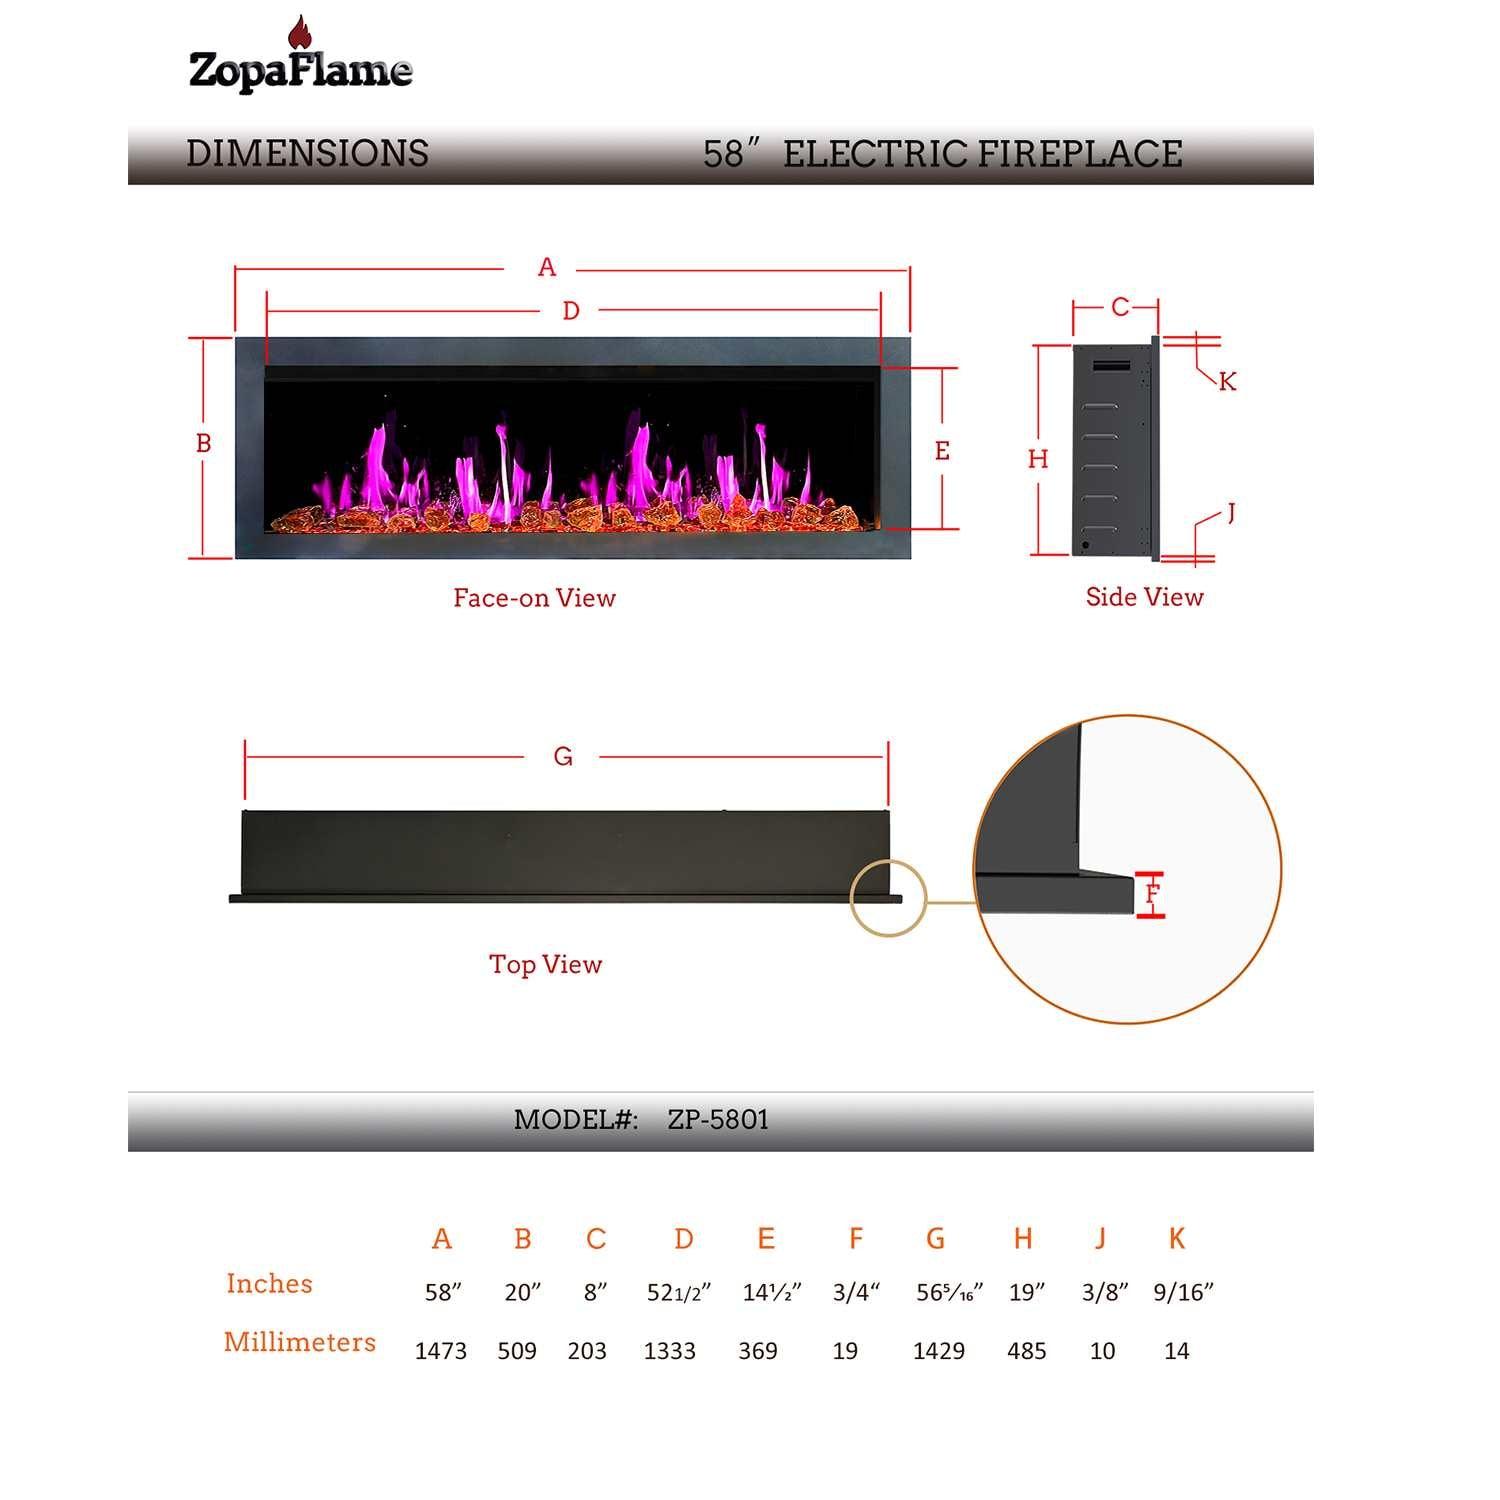 ZopaFlame™ 58" Linear Wall-mount Electric Fireplace - BG19588V - ZopaFlame Fireplaces